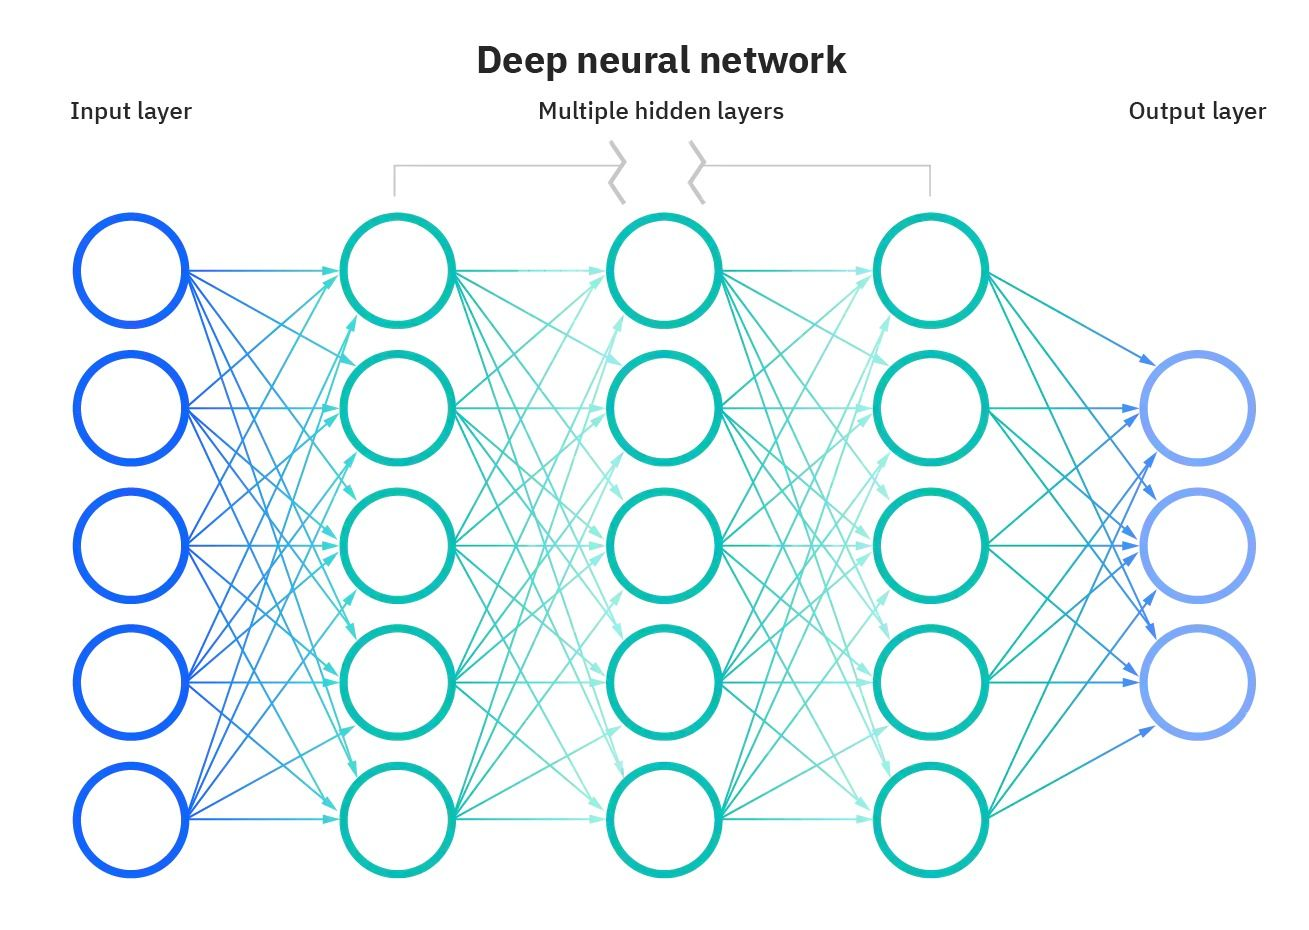 Representation of Neural Network Image Source